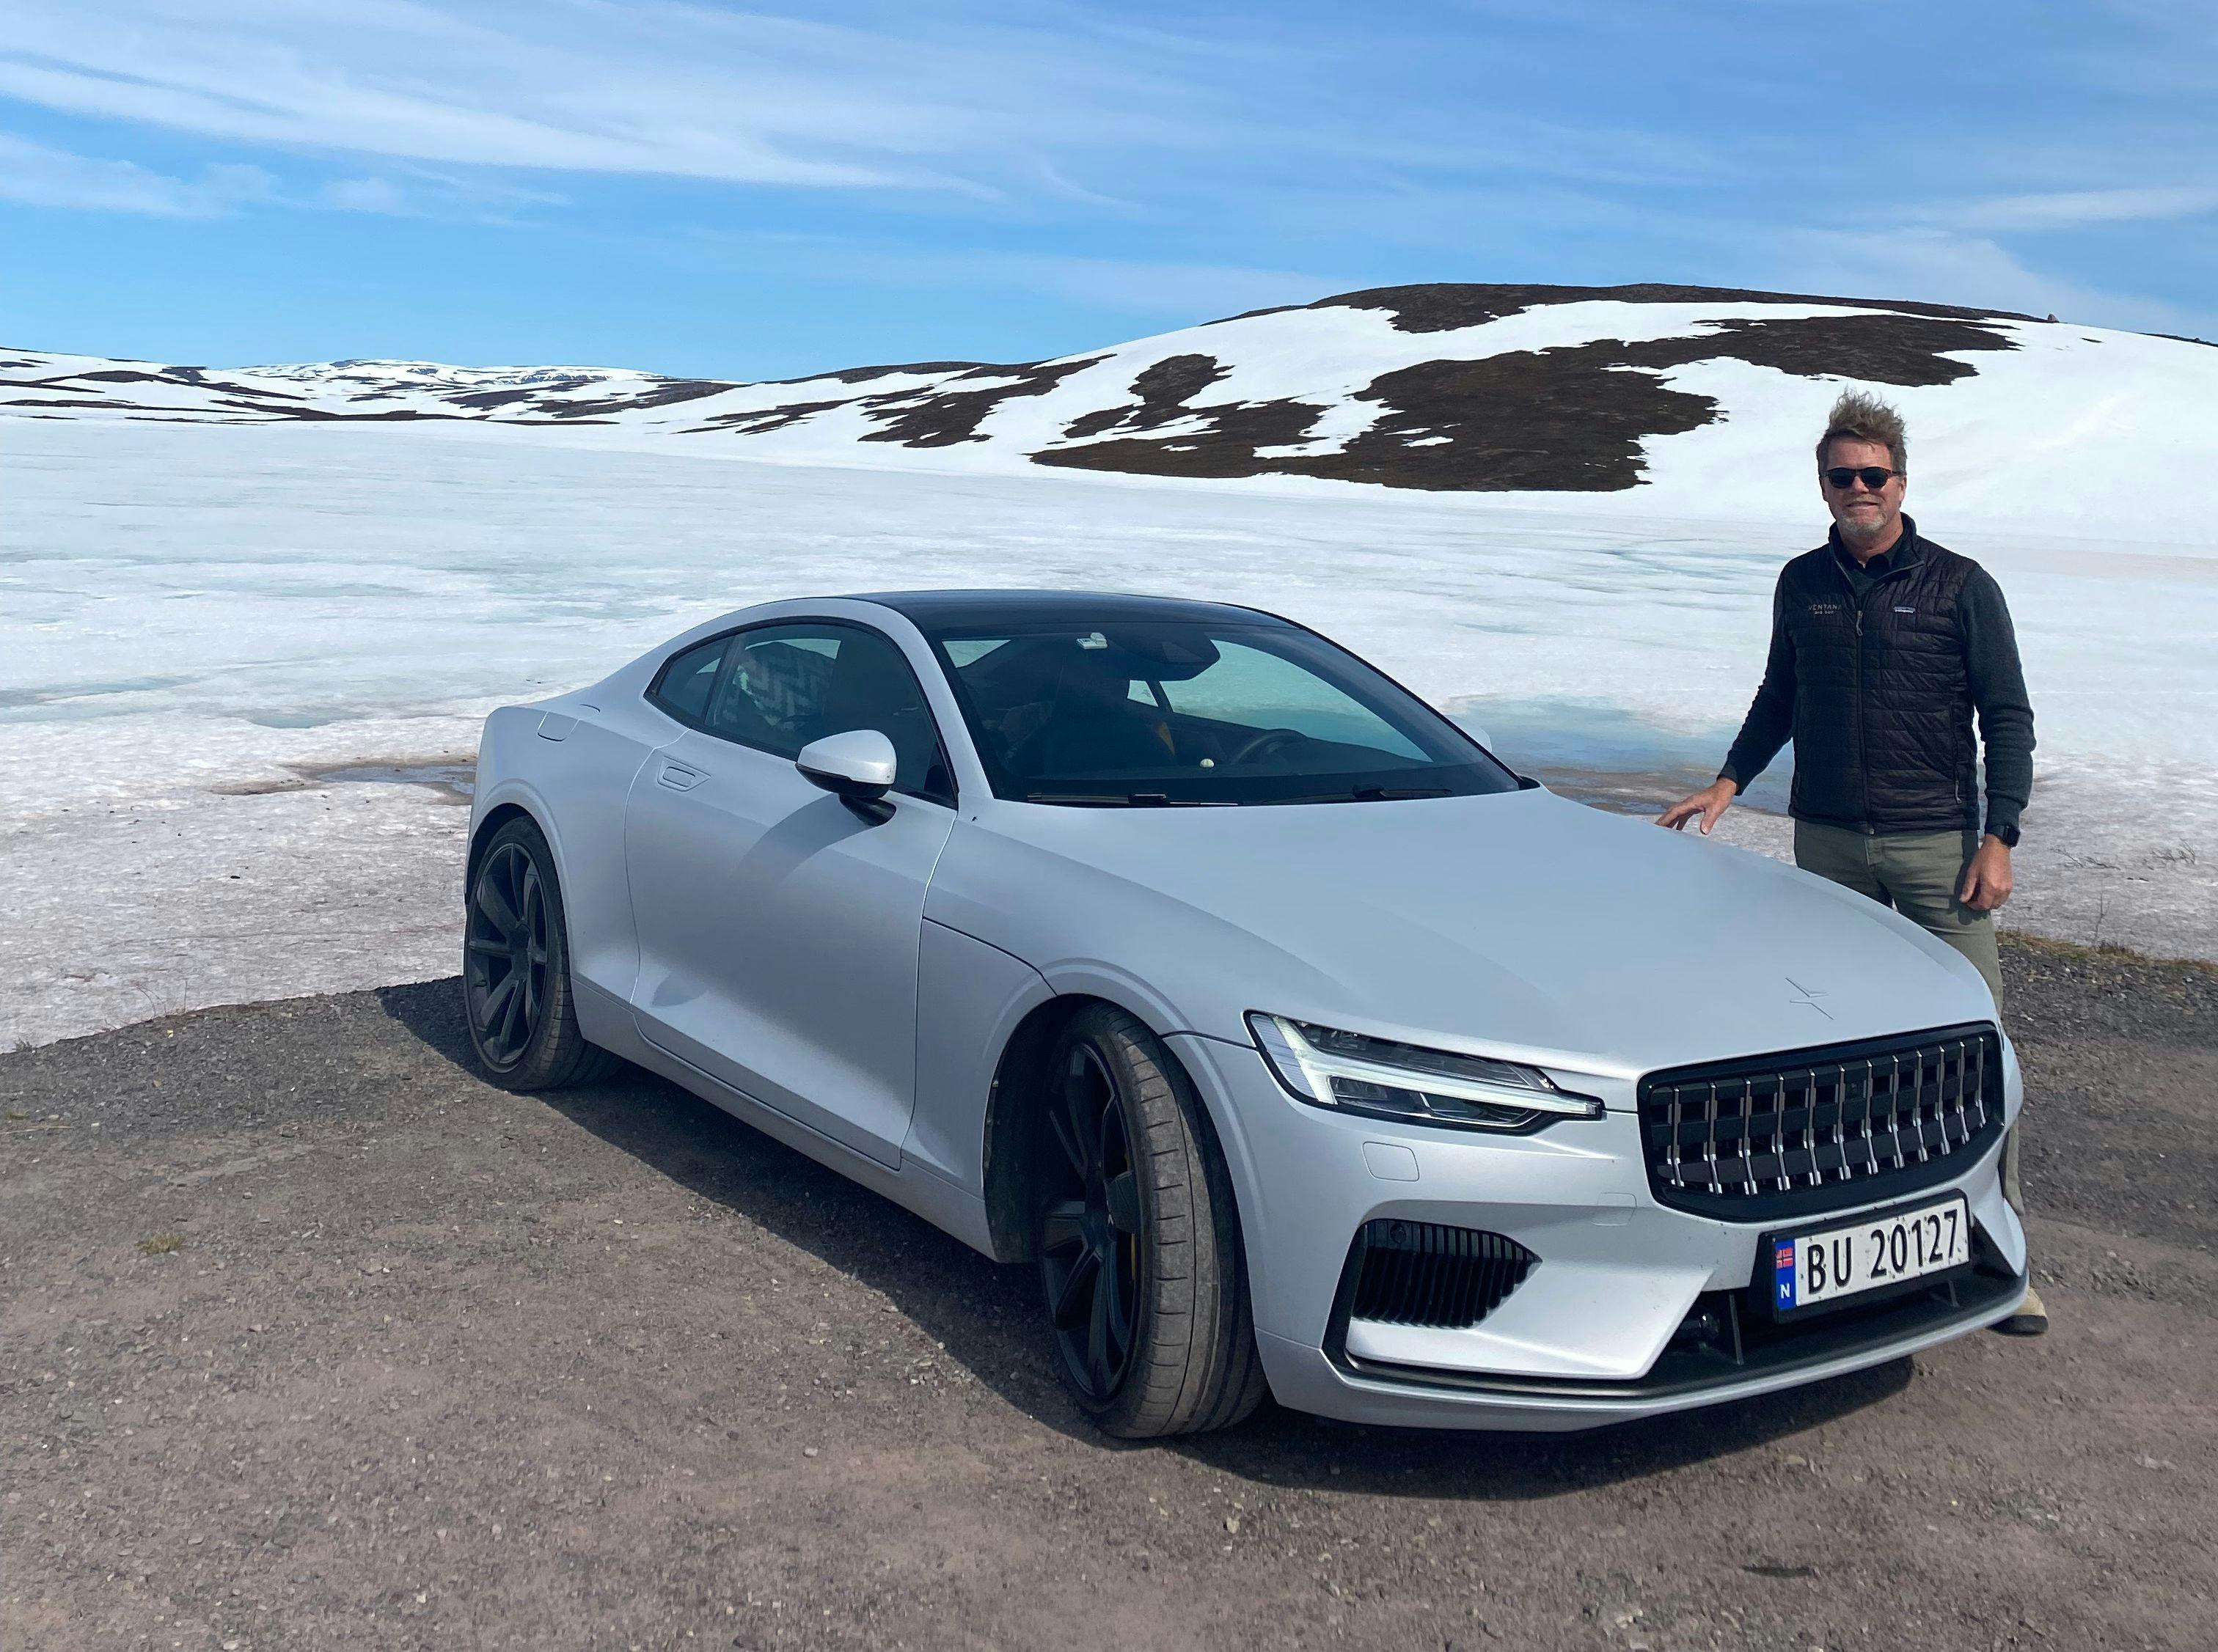 A curated Polestar electric car road trip through Norway